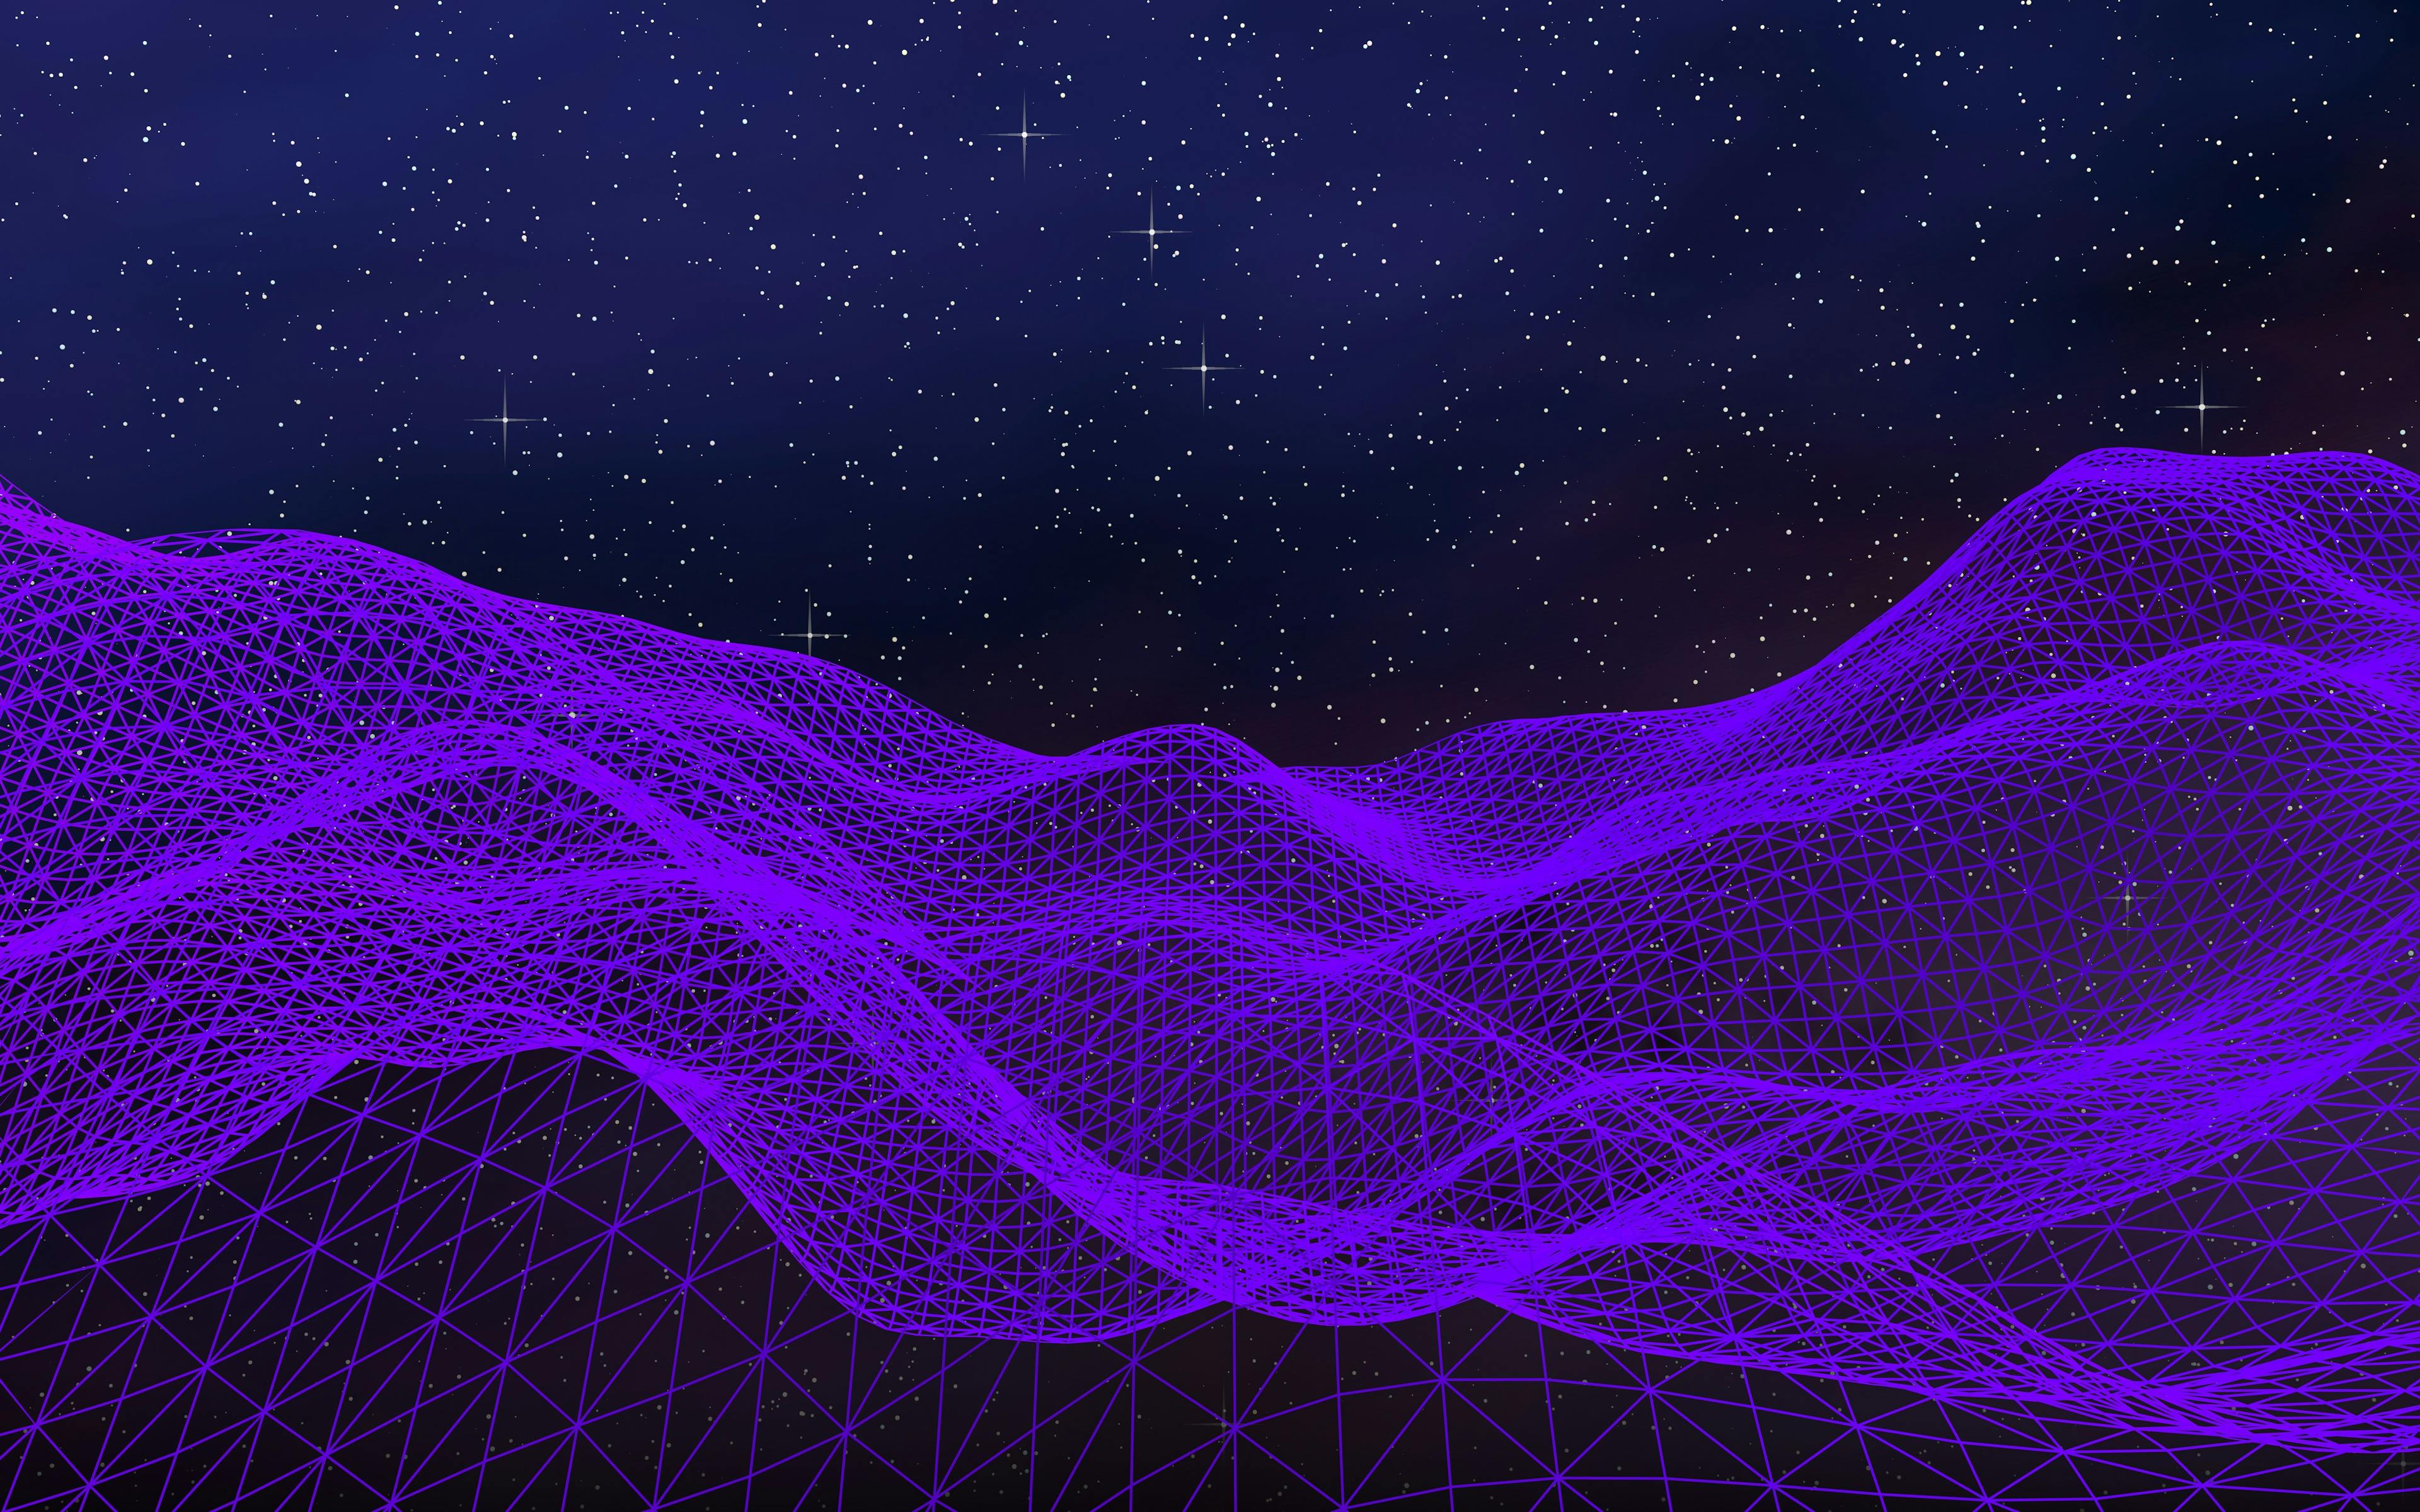 Abstract ultraviolet landscape on a dark background. Purple cyberspace grid. hi tech network. Outer space. Violet starry outer space texture. 3D illustration | Image Credit: © Plastic man - stock.adobe.com